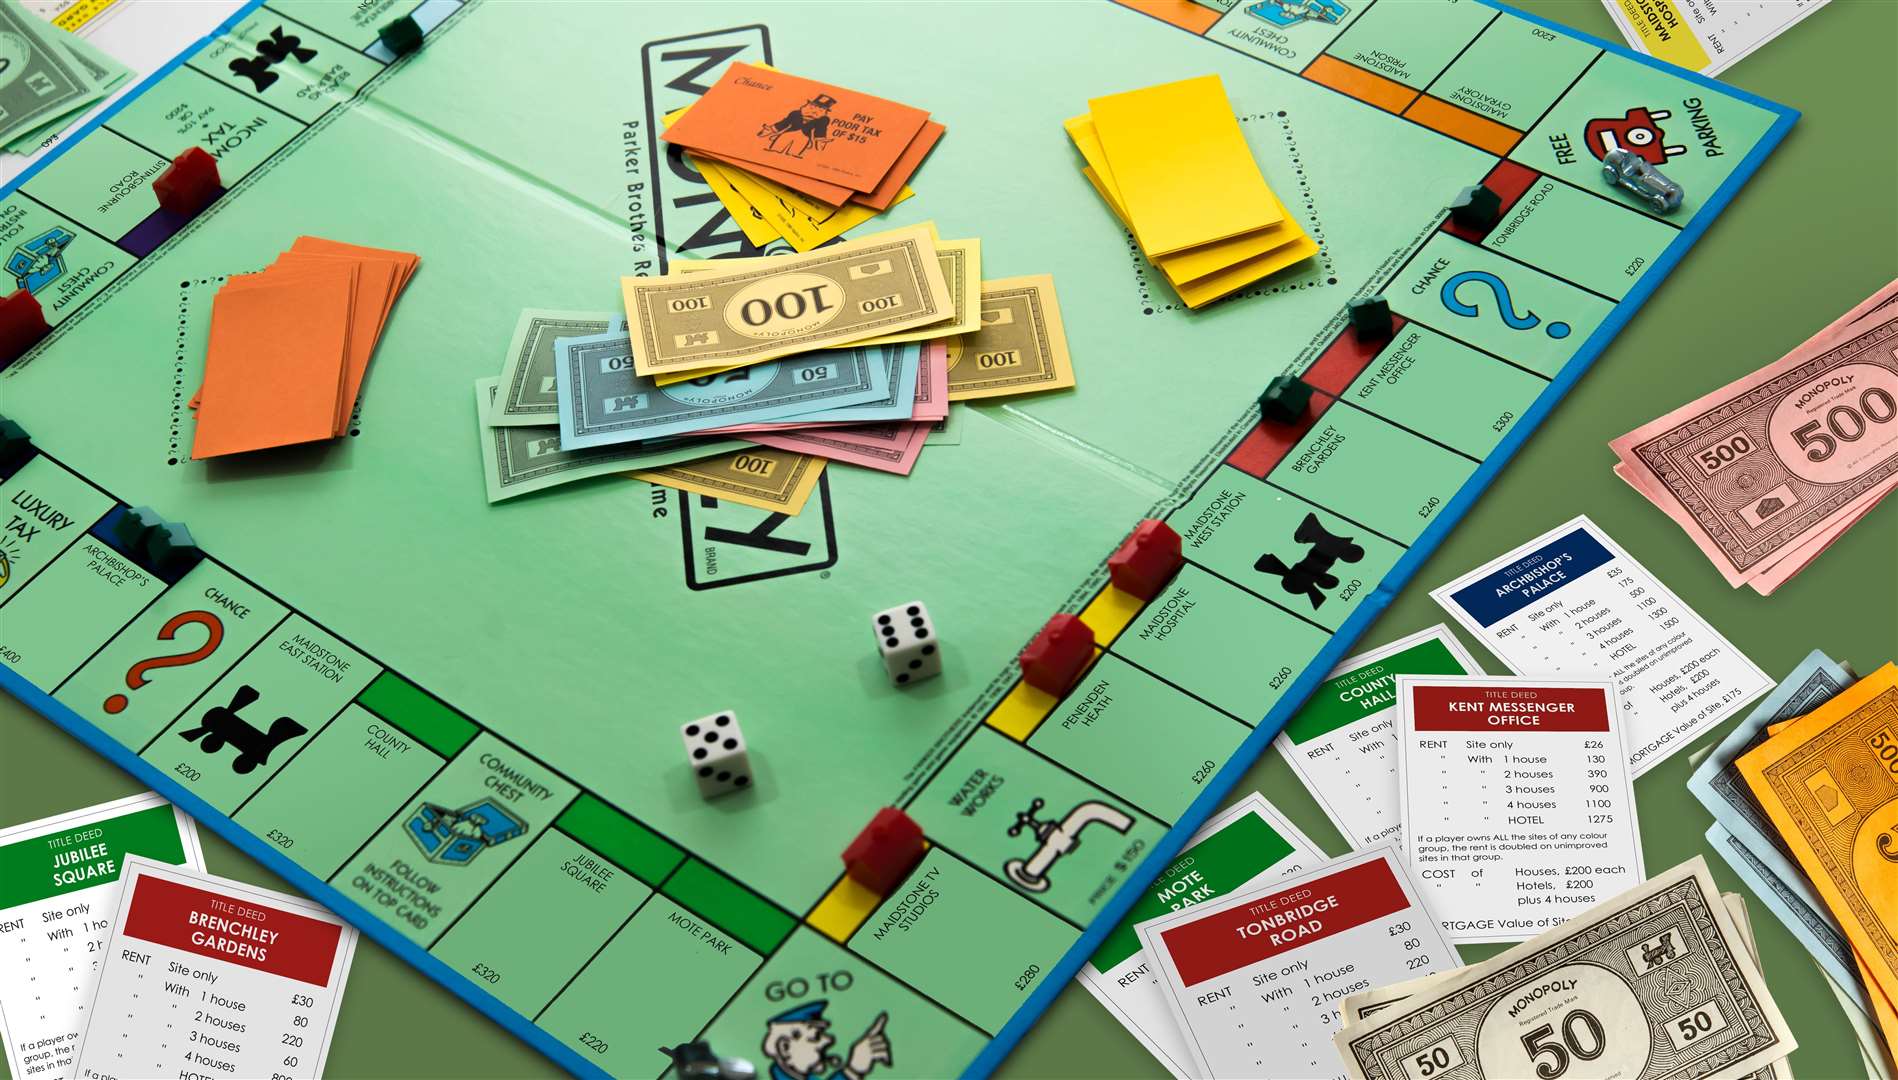 We imagine what the iconic Monopoly board could look like with Maidstone landmarks